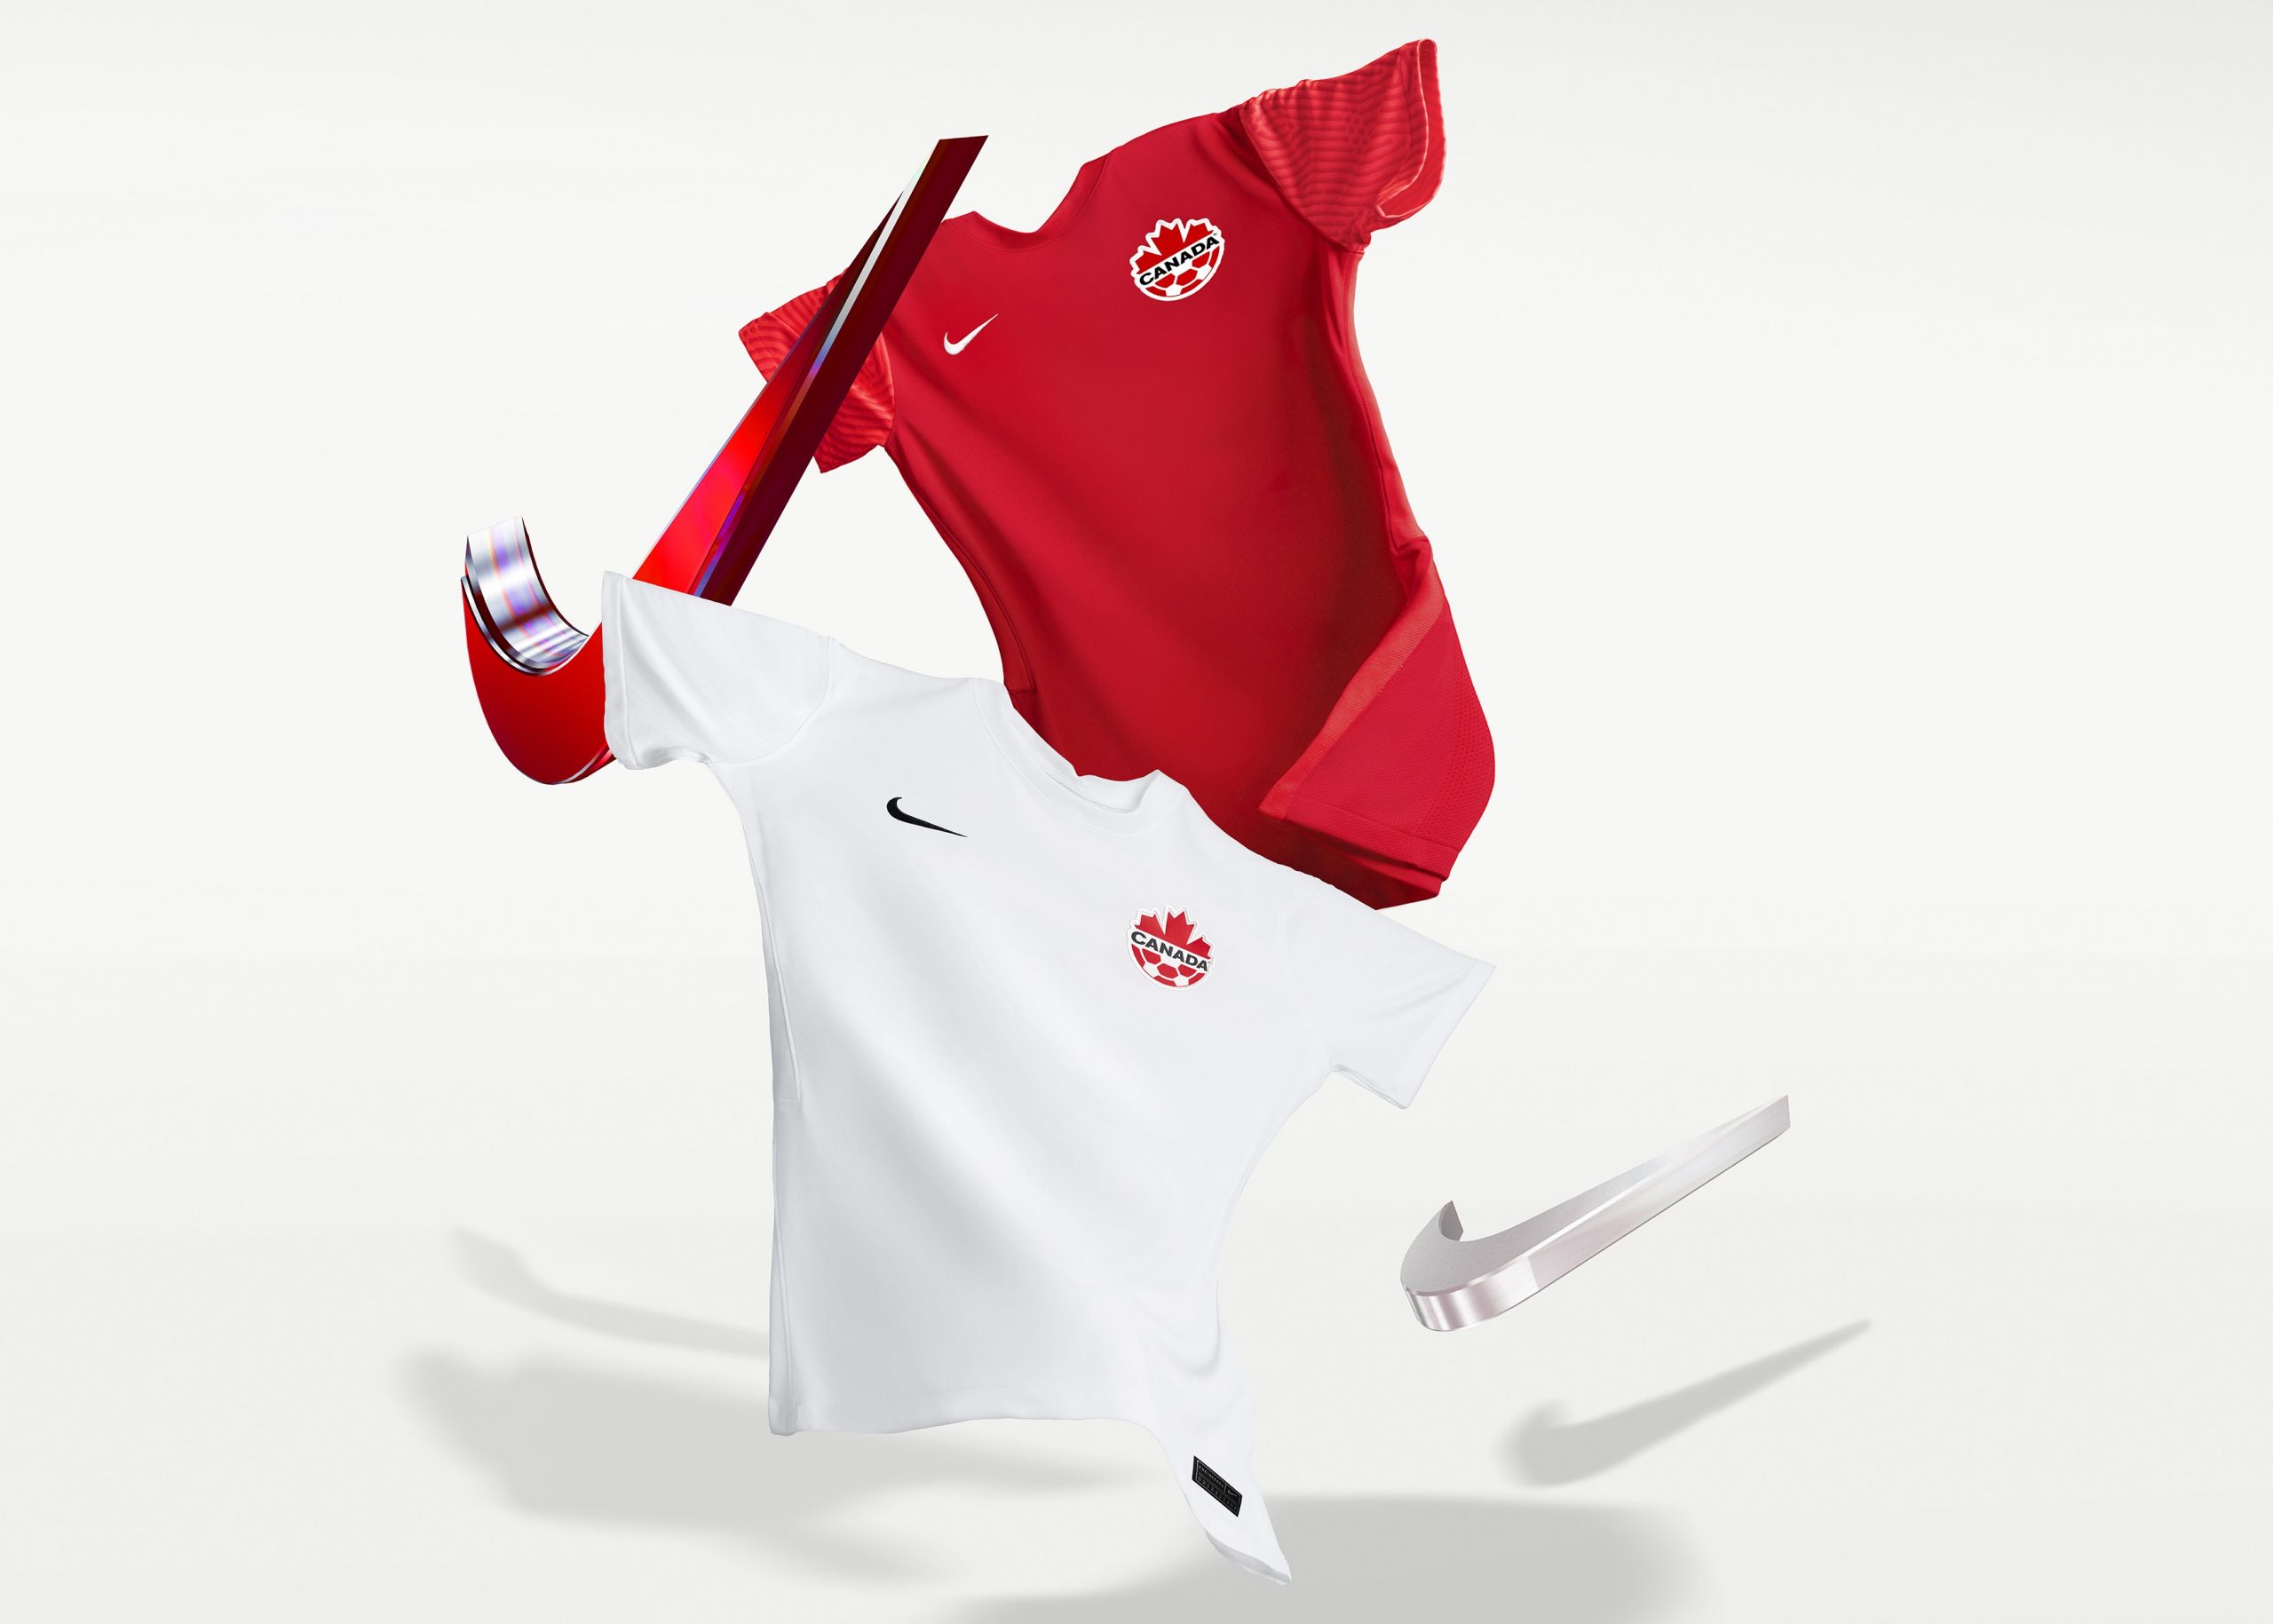 What are Canada's all-time best and worst jerseys? : r/CanadaSoccer